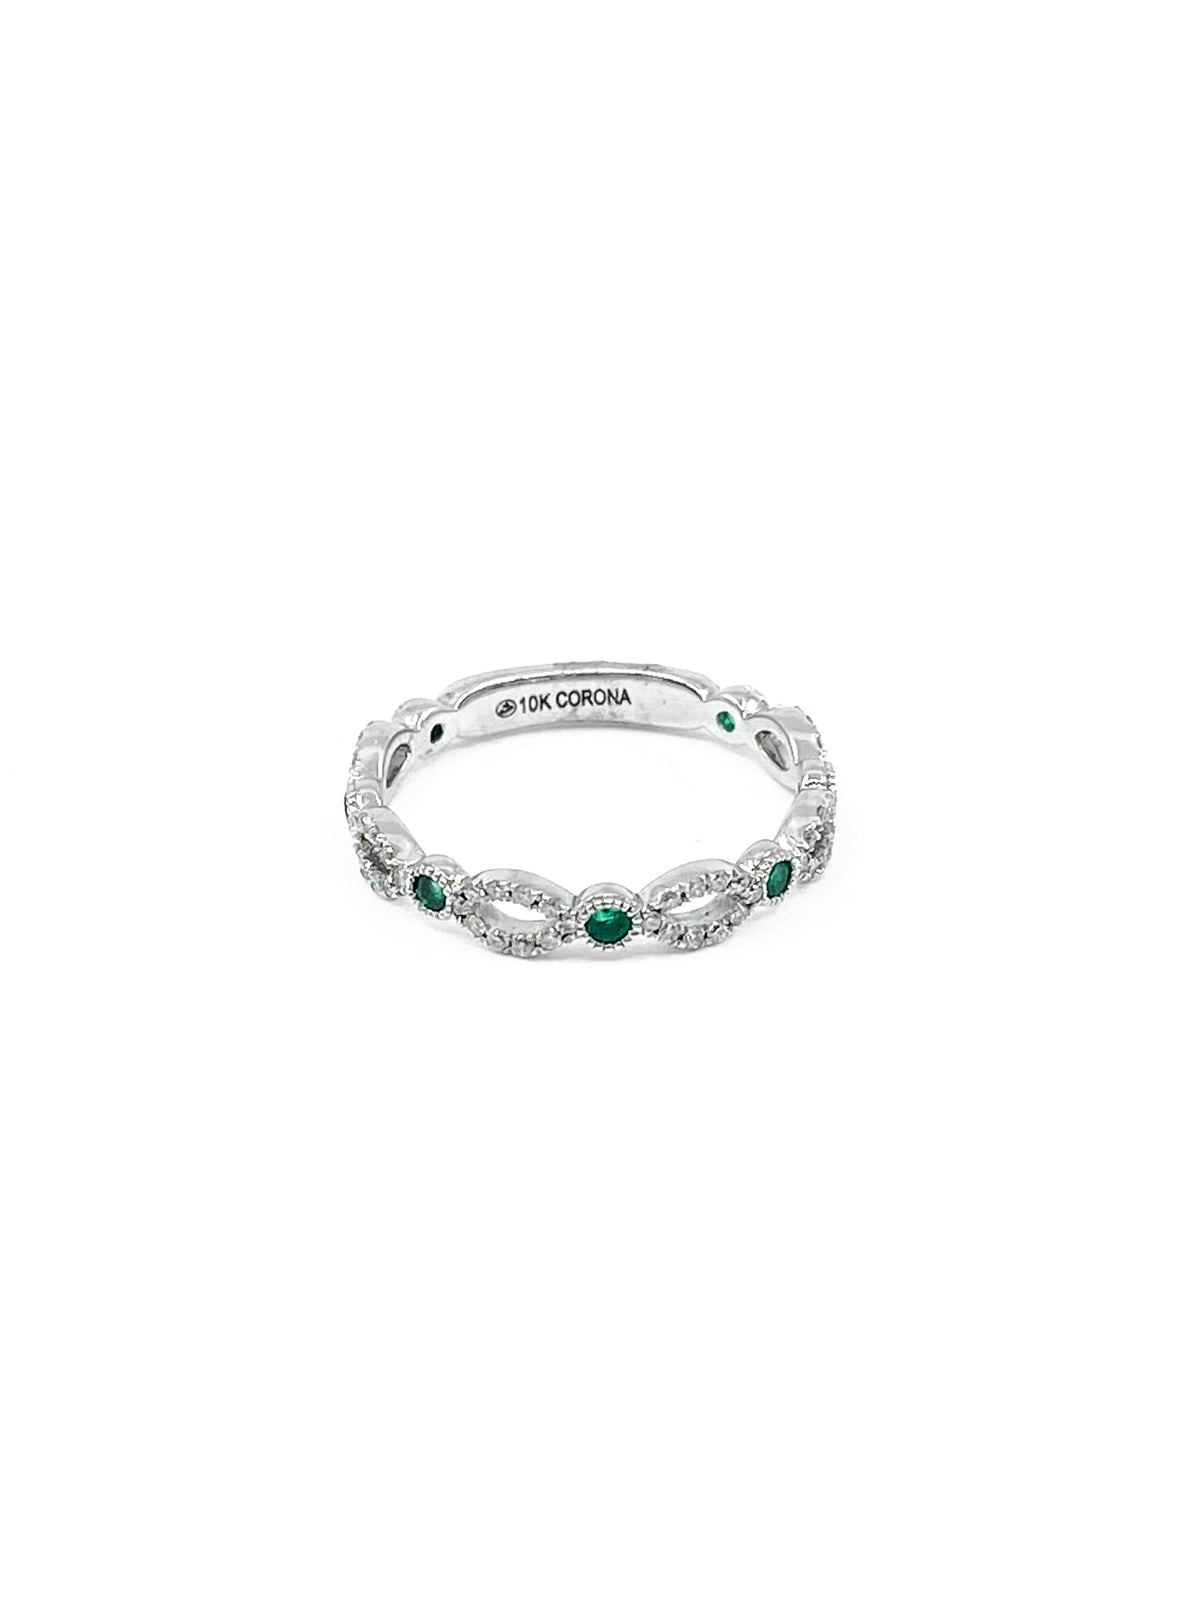 10K White Gold 0.28cttw Genuine Emerald and 0.18cttw Diamond Ring, size 6.5